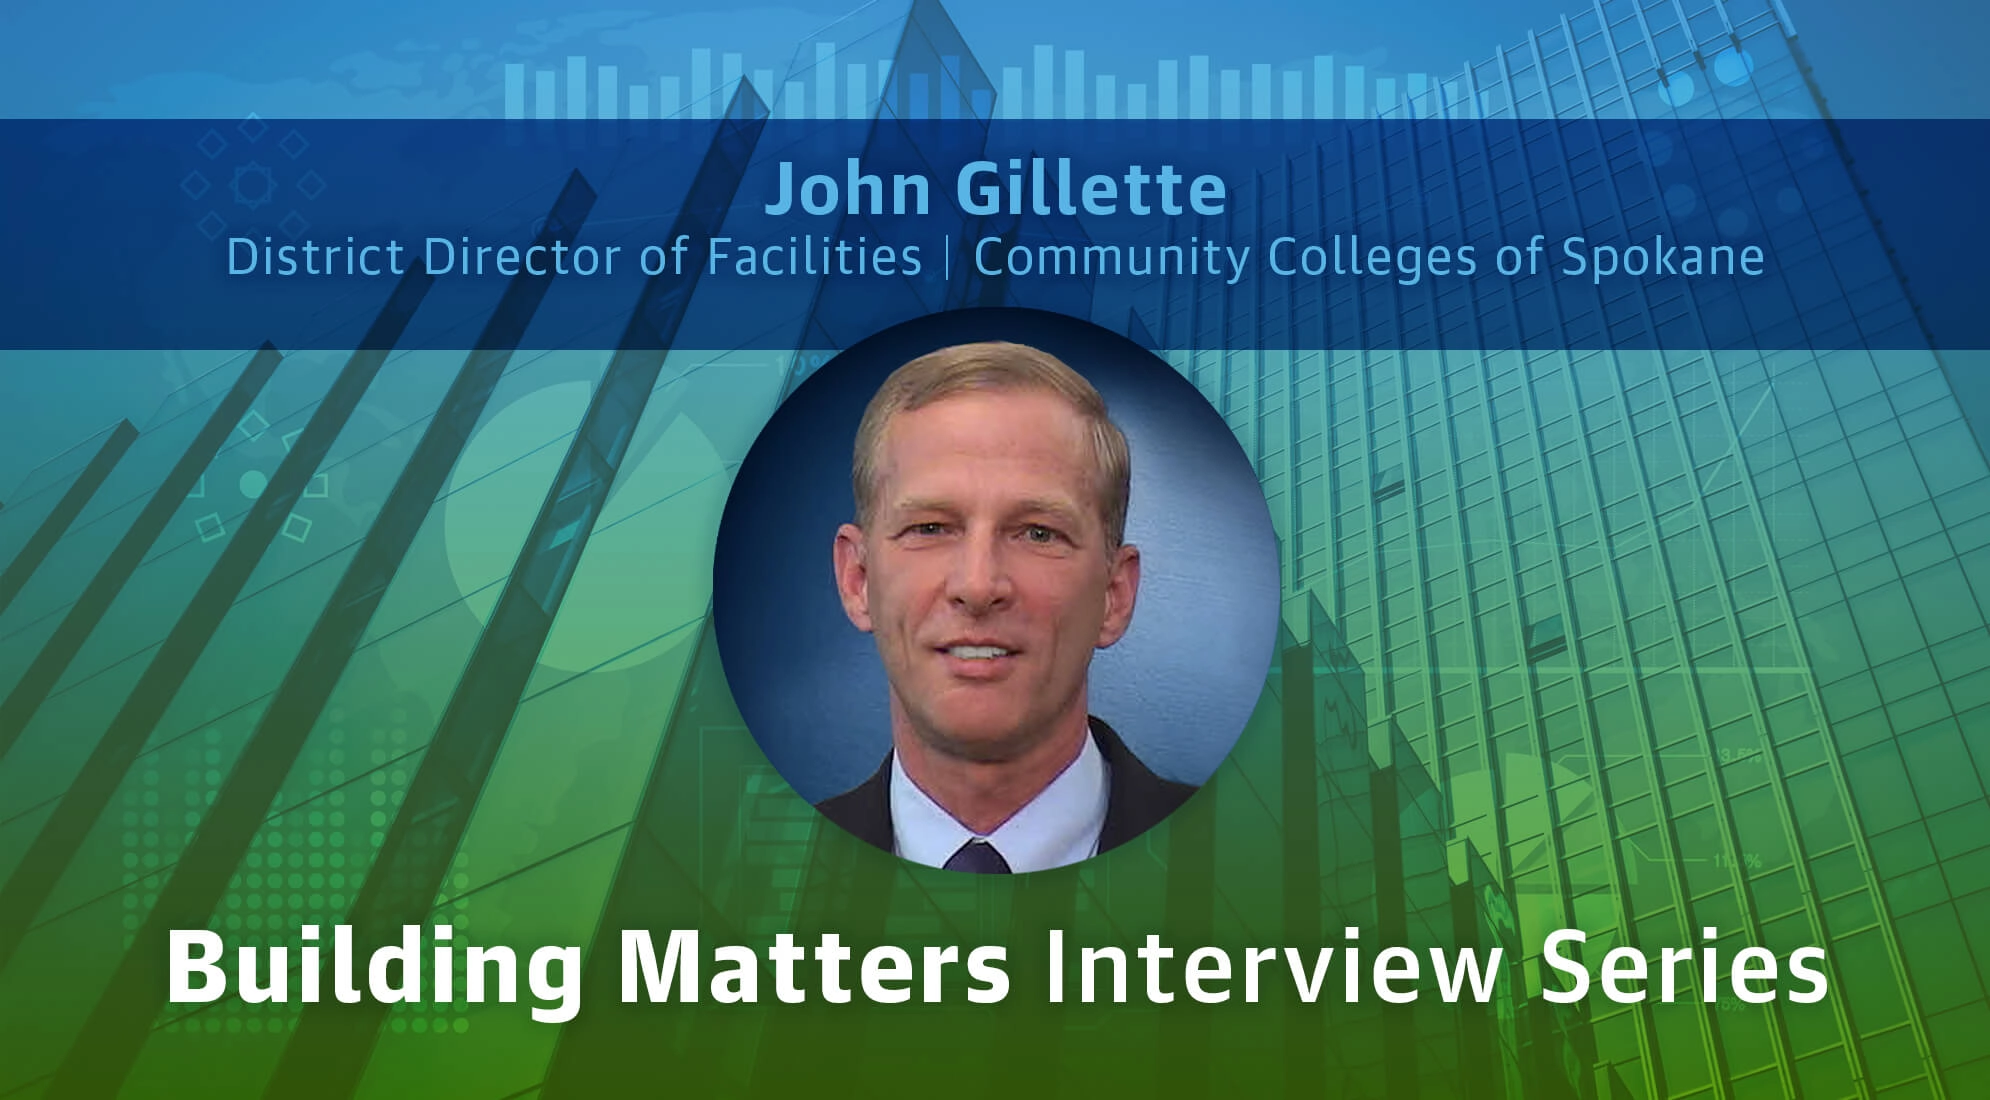 Community College Facilities Insights from John Gillette 1